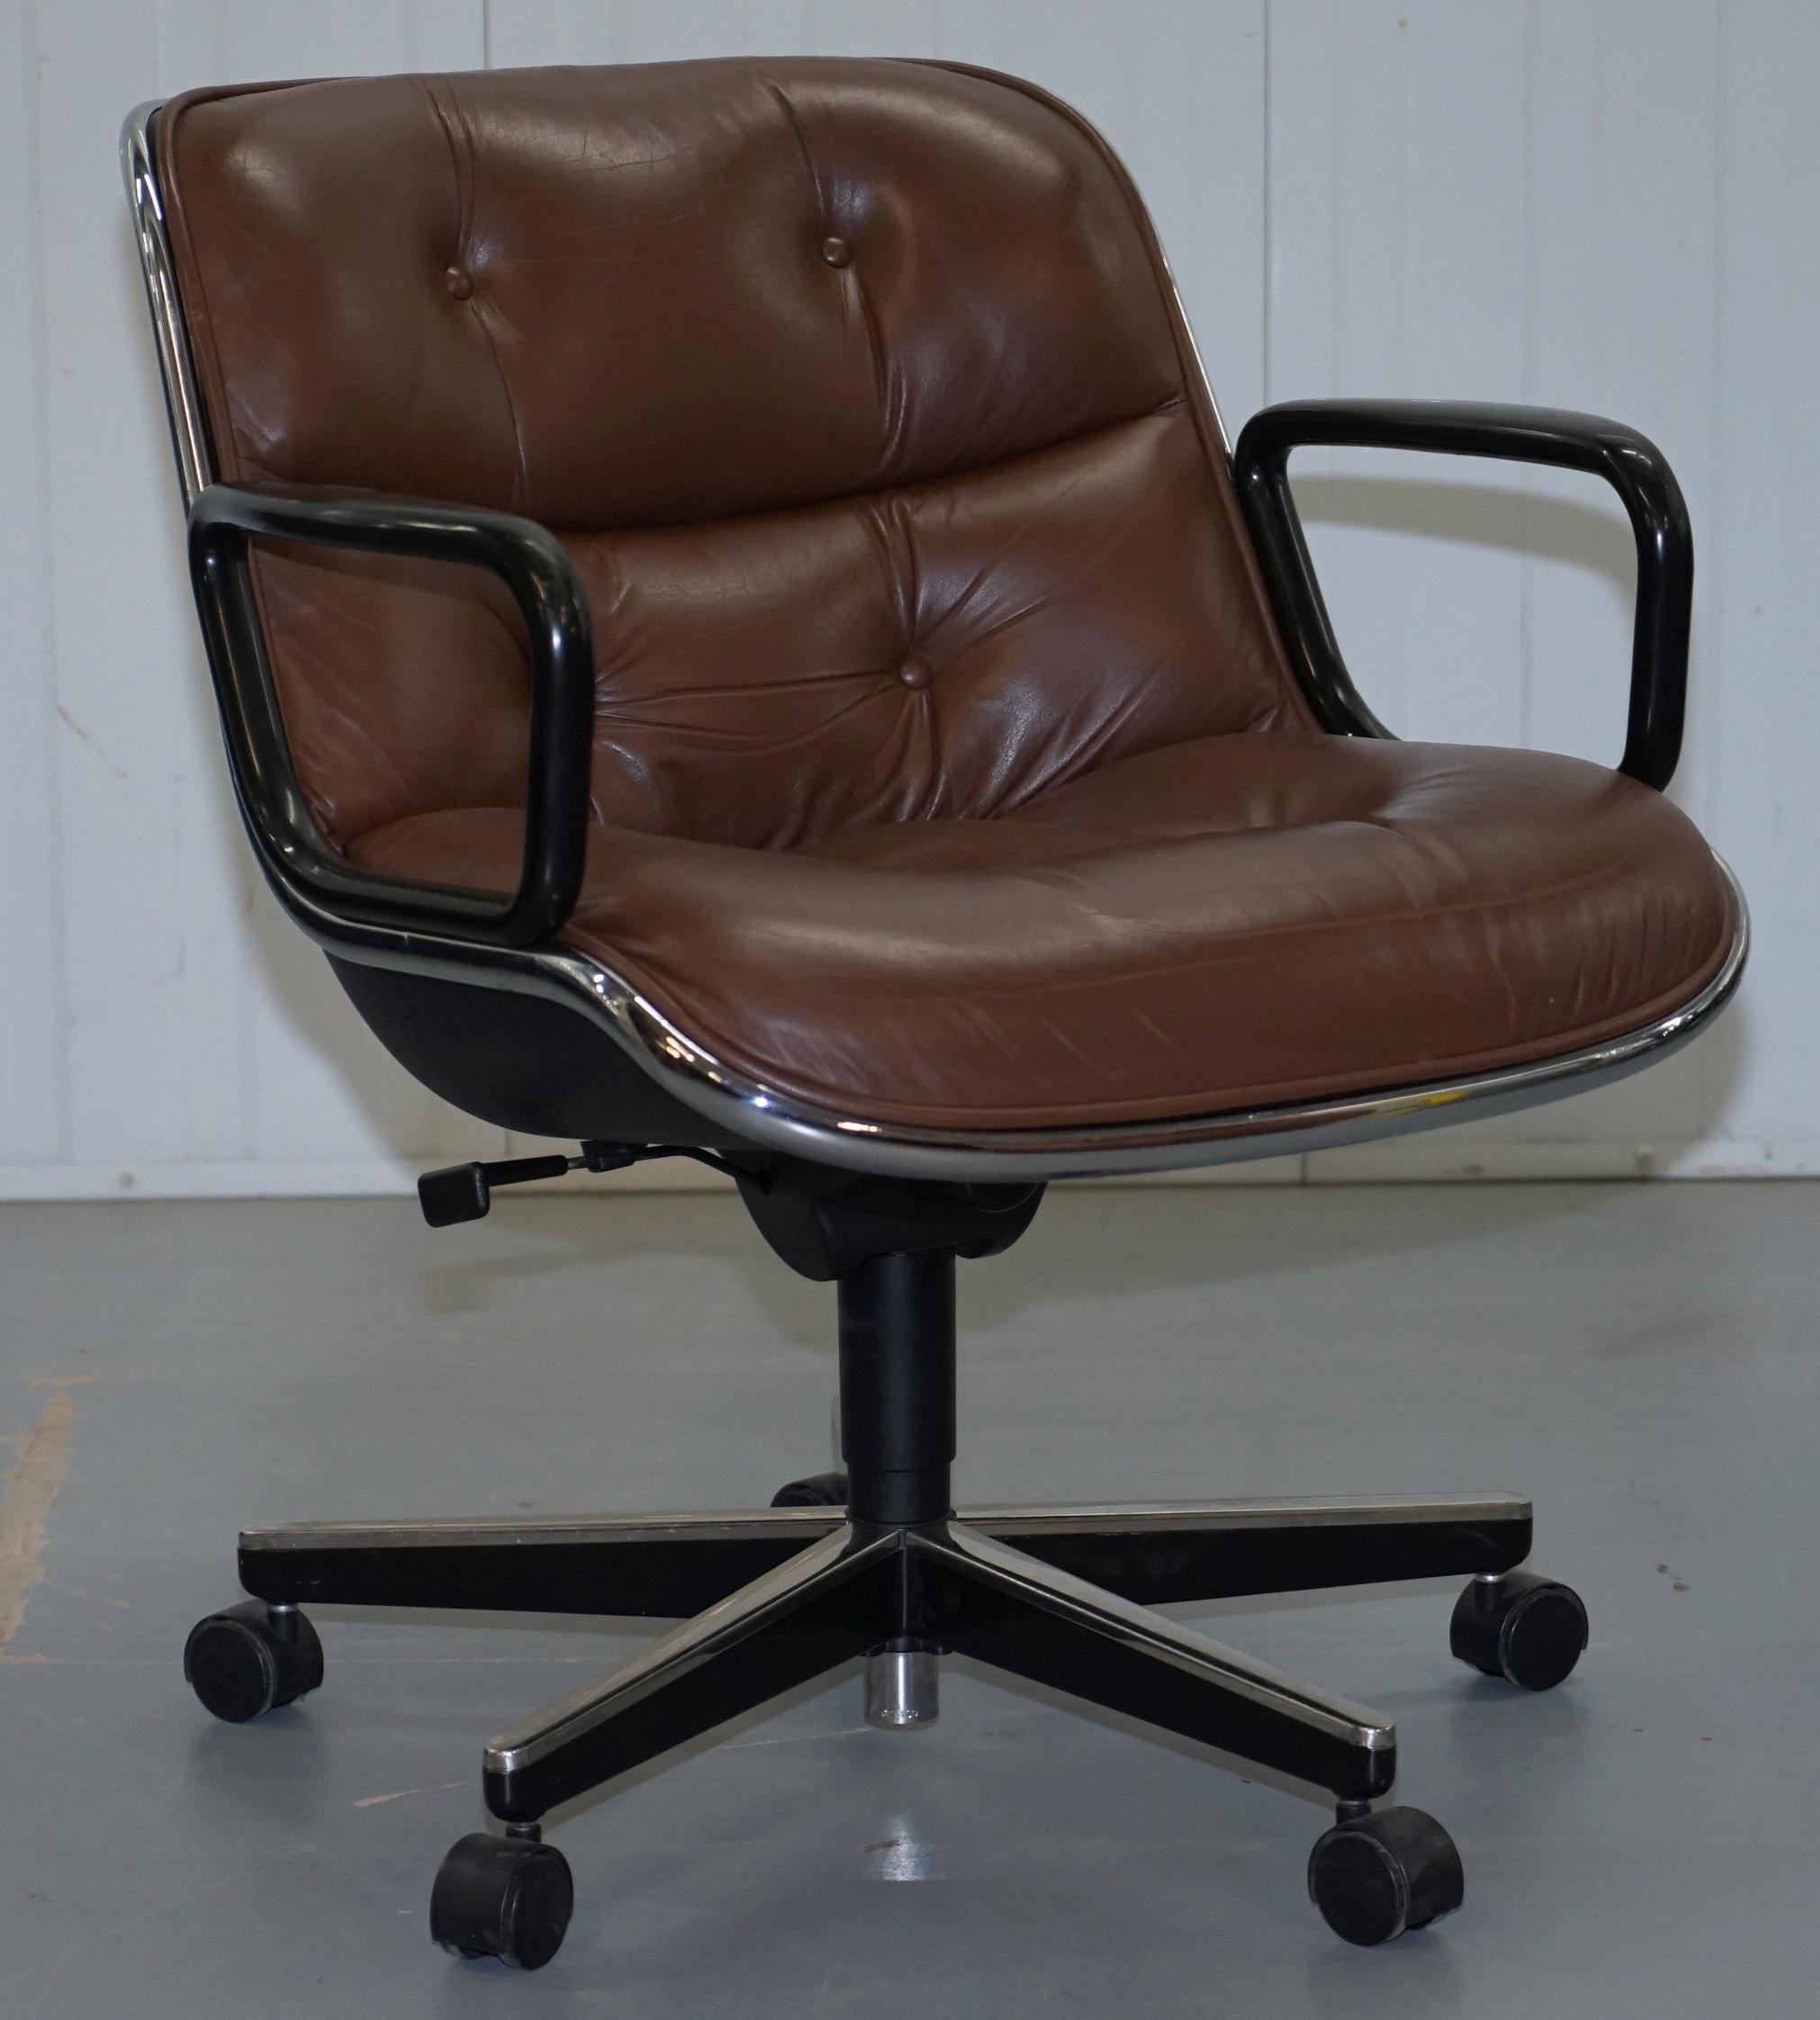 Wimbledon-Furniture is delighted to offer for auction one of eight original Knoll Pollock Executive office swivel chairs current retail is £4940 per chair.
 
Please note the delivery fee listed is just a guide, it covers within the M25 only, for an